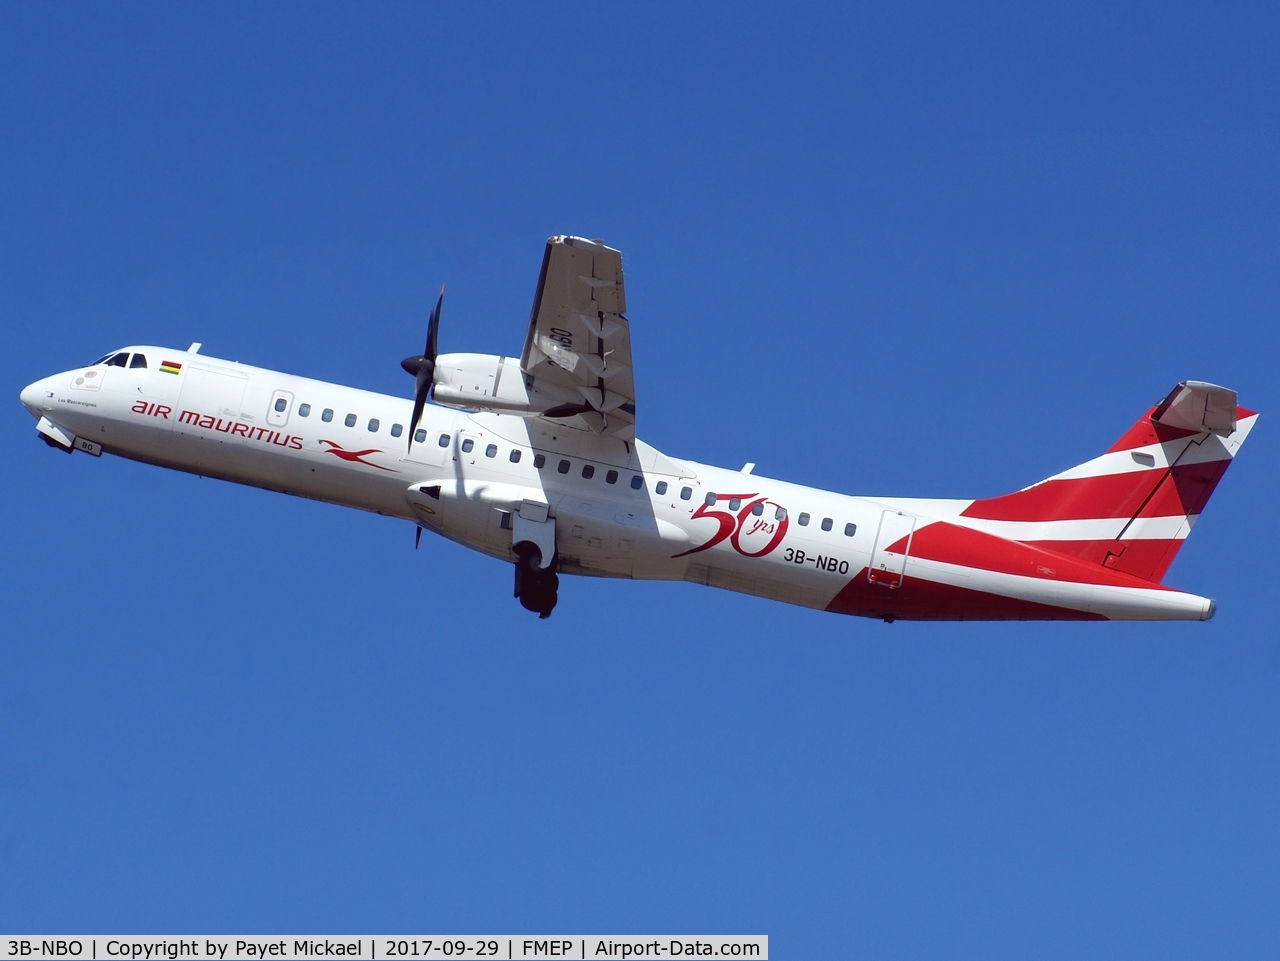 3B-NBO, 2010 ATR 72-212A C/N 926, With stickers '50years'